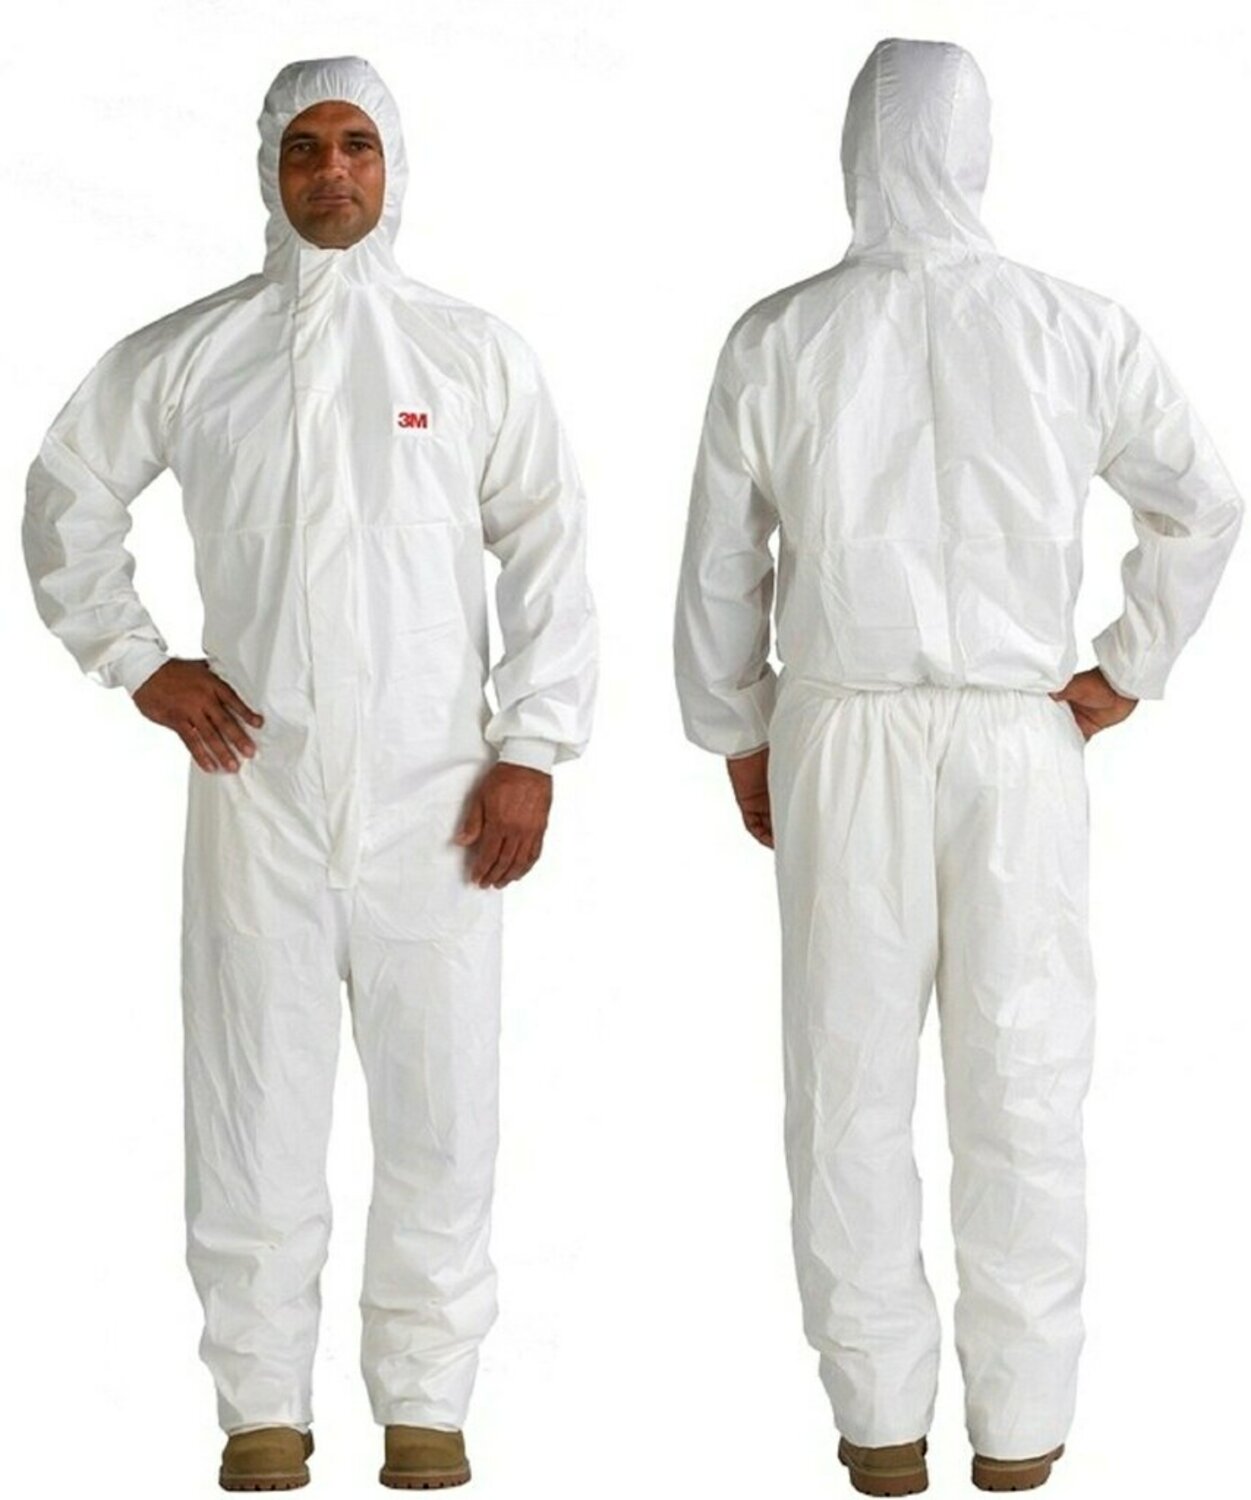 7100198129 - 3M Disposable Protective Coverall 4545-M, 20 EA/Case